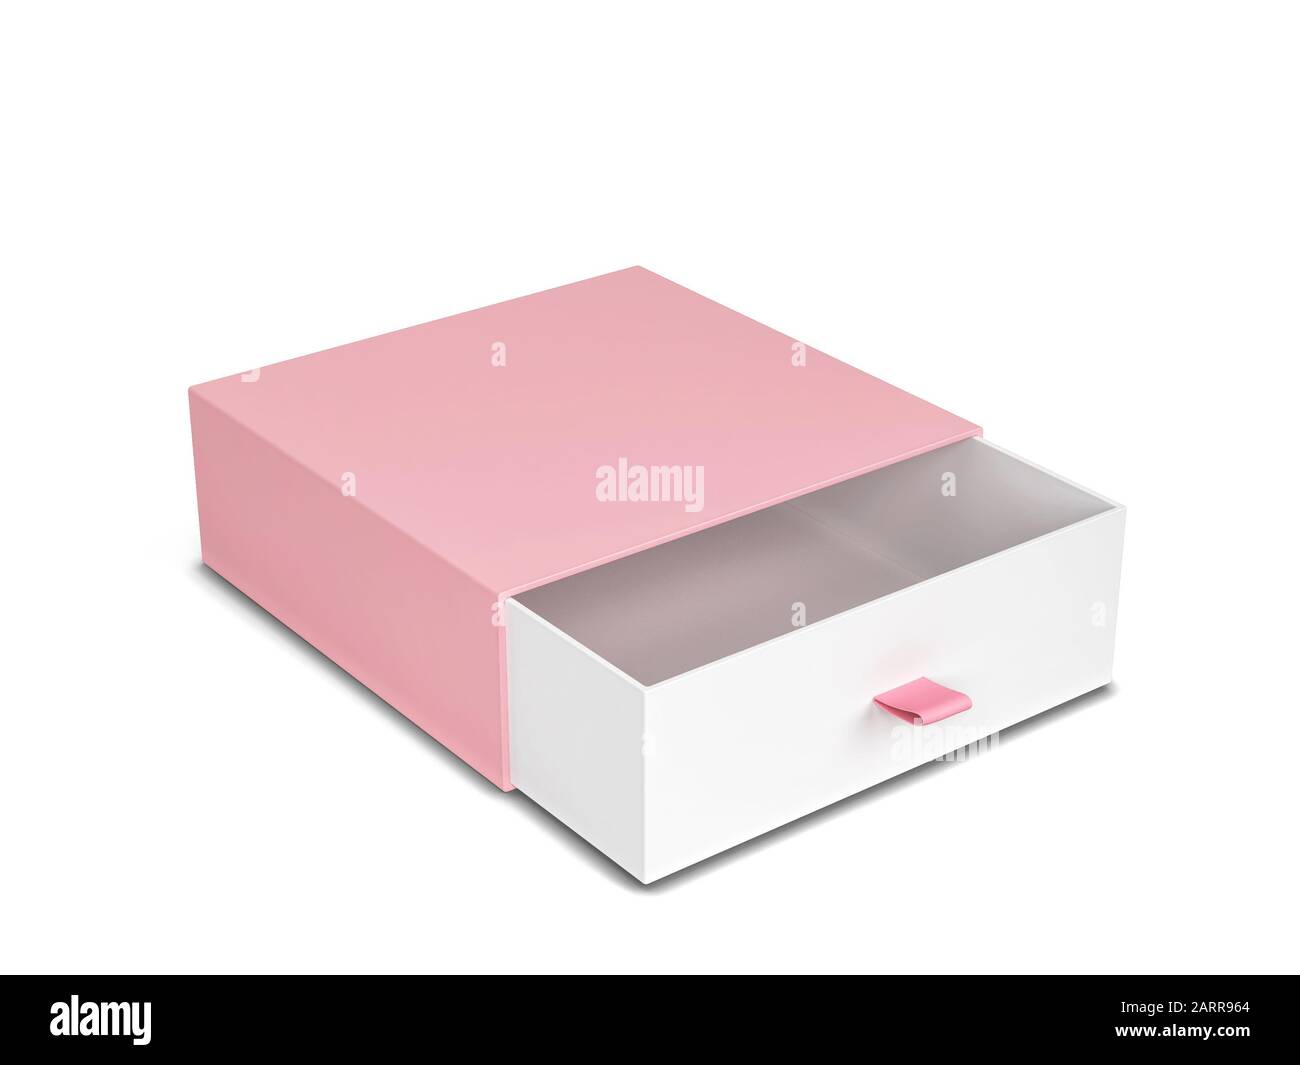 Download Blank Drawer Type Box Mockup 3d Illustration Isolated On White Background Stock Photo Alamy